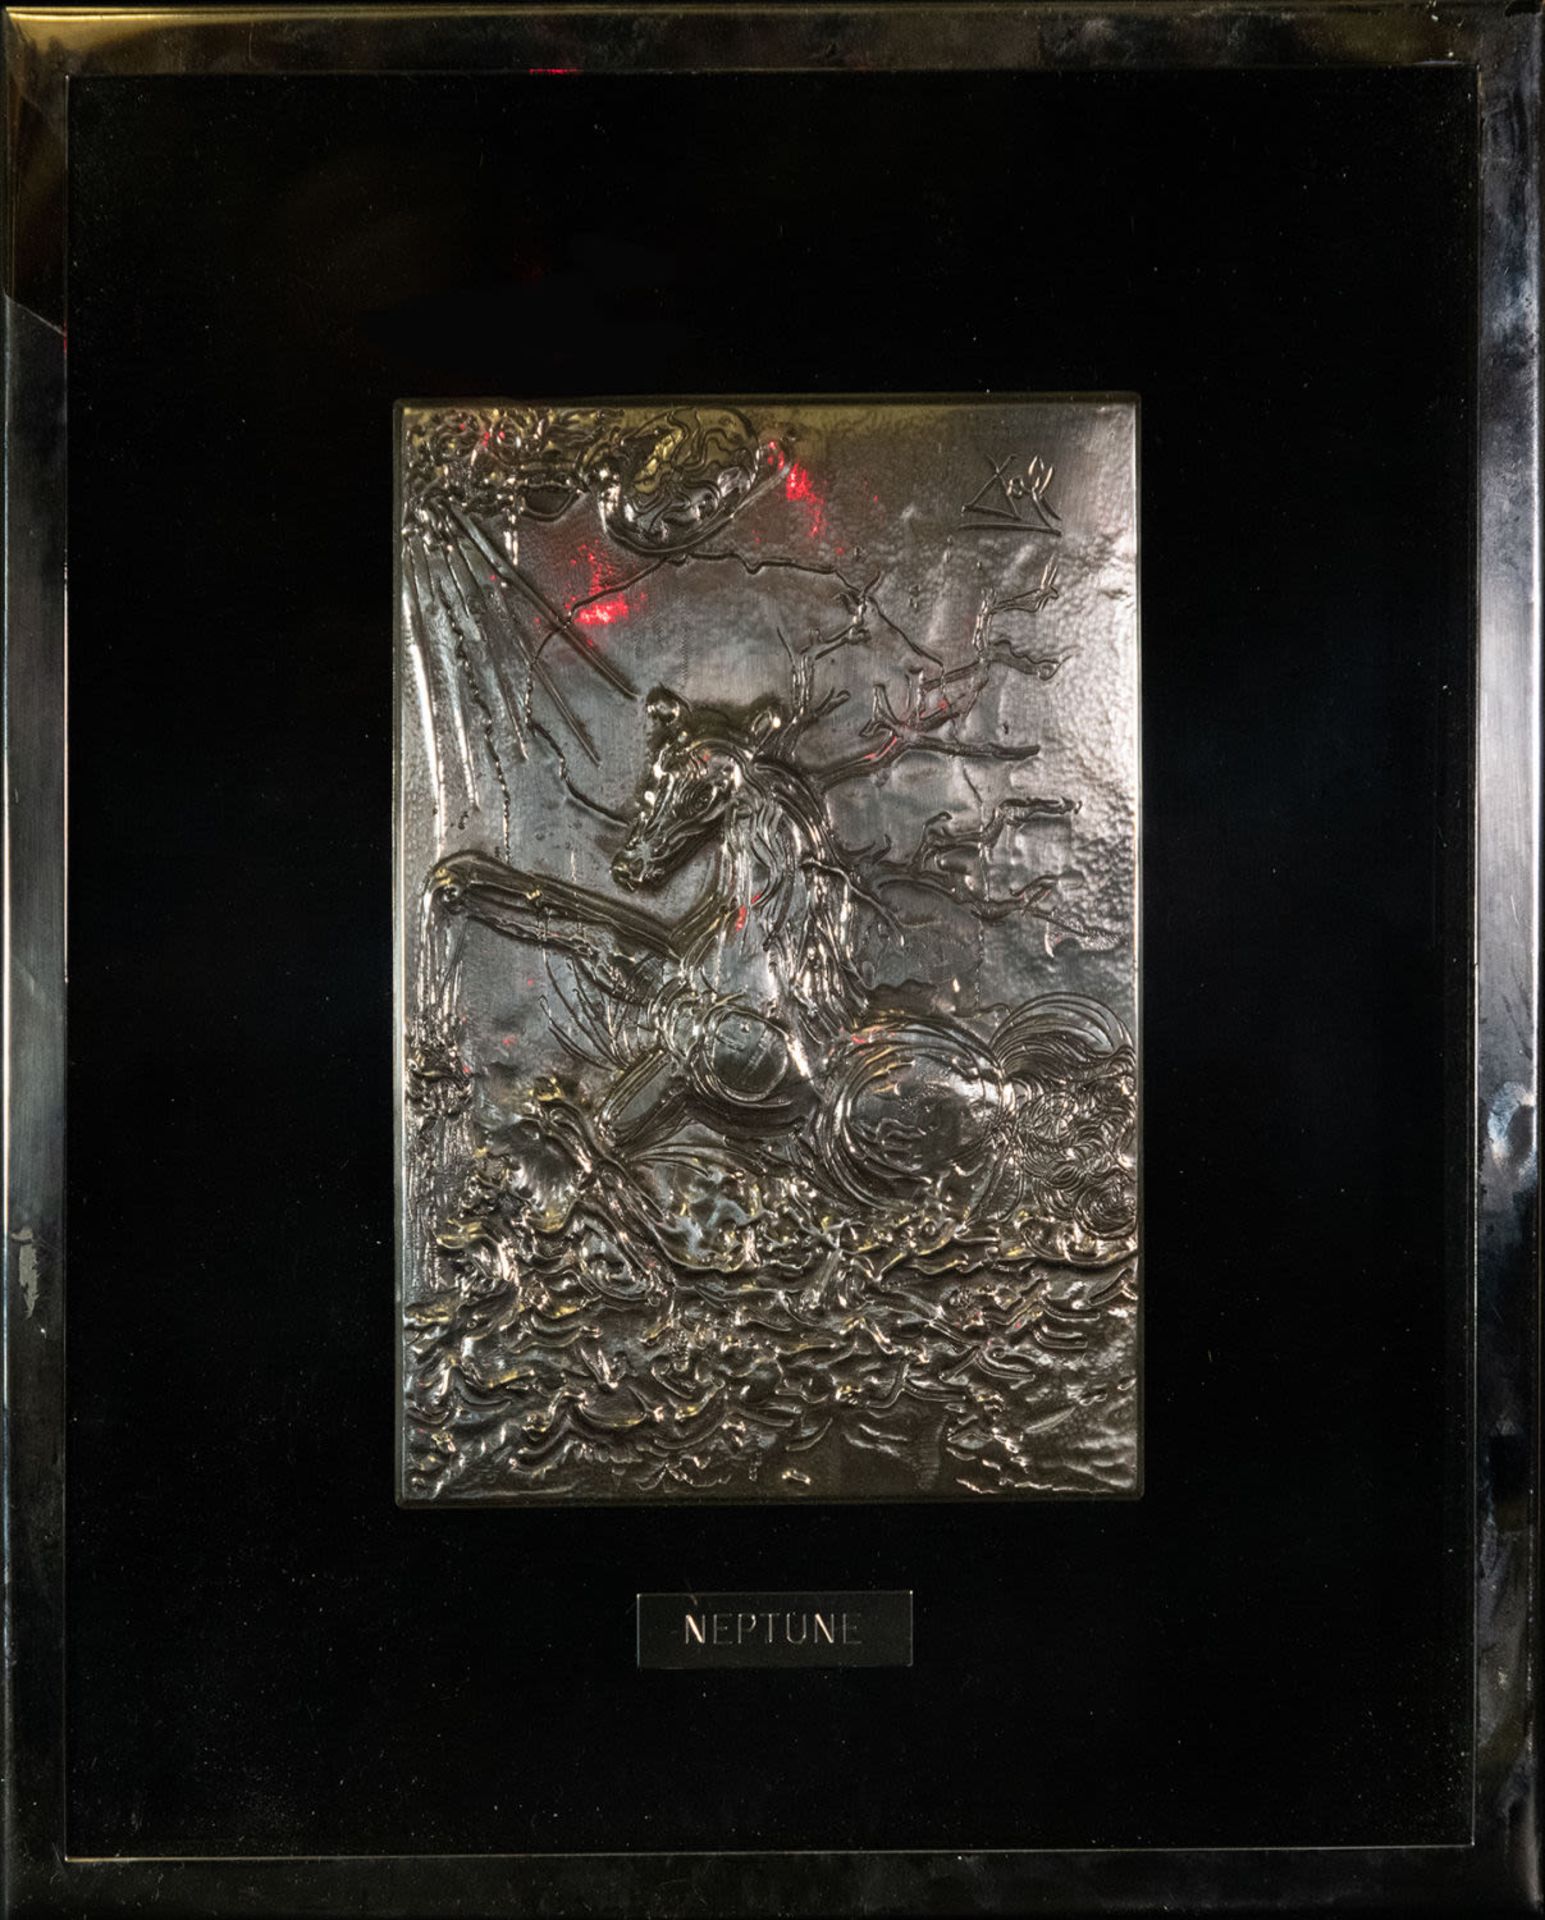 Dalí silver plate from the "Caballos Dalinianos" Series, numbered and serialized